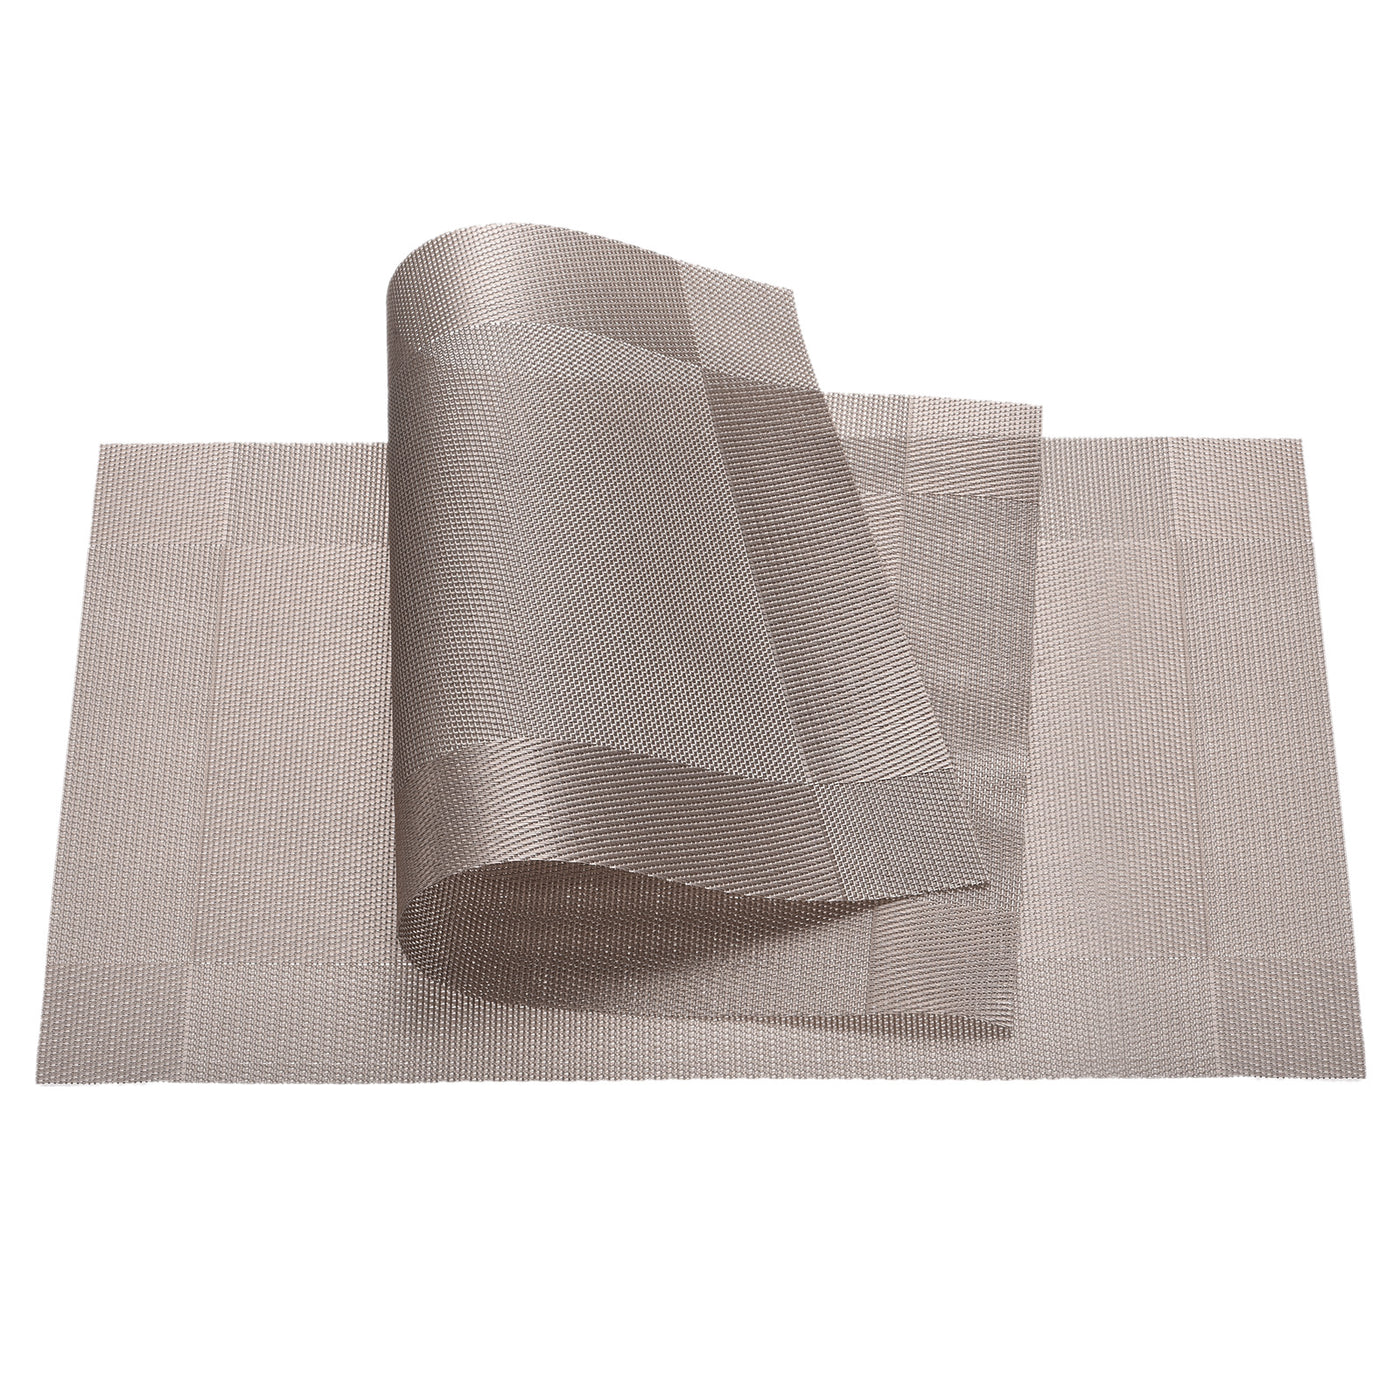 uxcell Uxcell Place Mats 450x300mm 6pcs PVC Table Washable Woven Placemat, Gold Brown